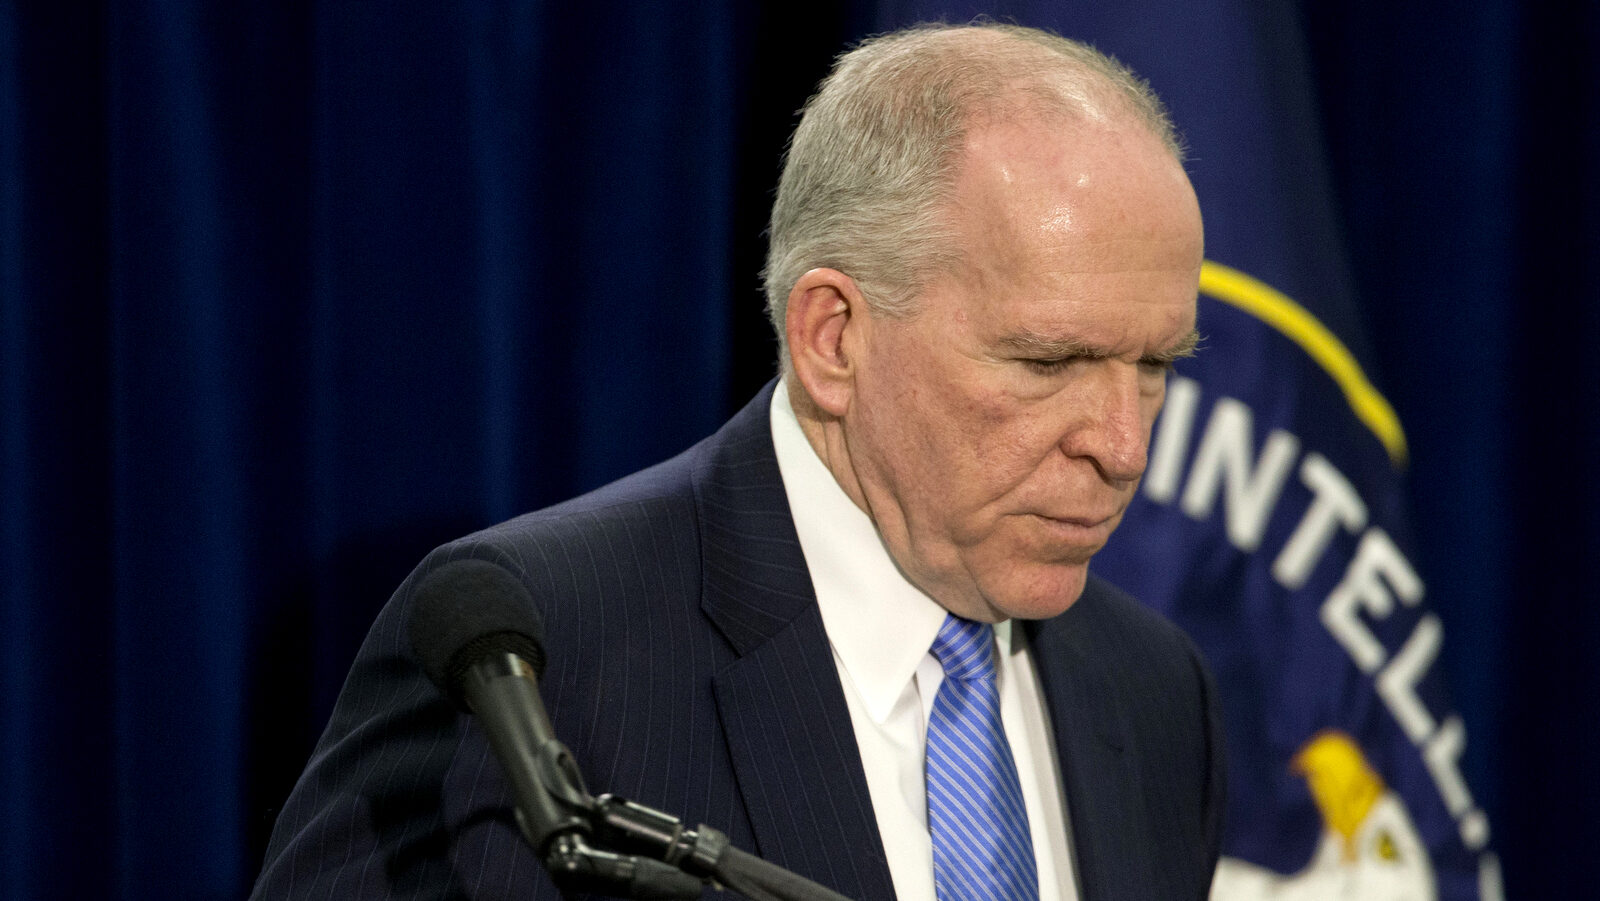 CIA Director John Brennan leaves after his news conference at CIA headquarters in Langley, Va., Thursday, Dec. 11, 2014. (AP Photo/Pablo Martinez Monsivais)